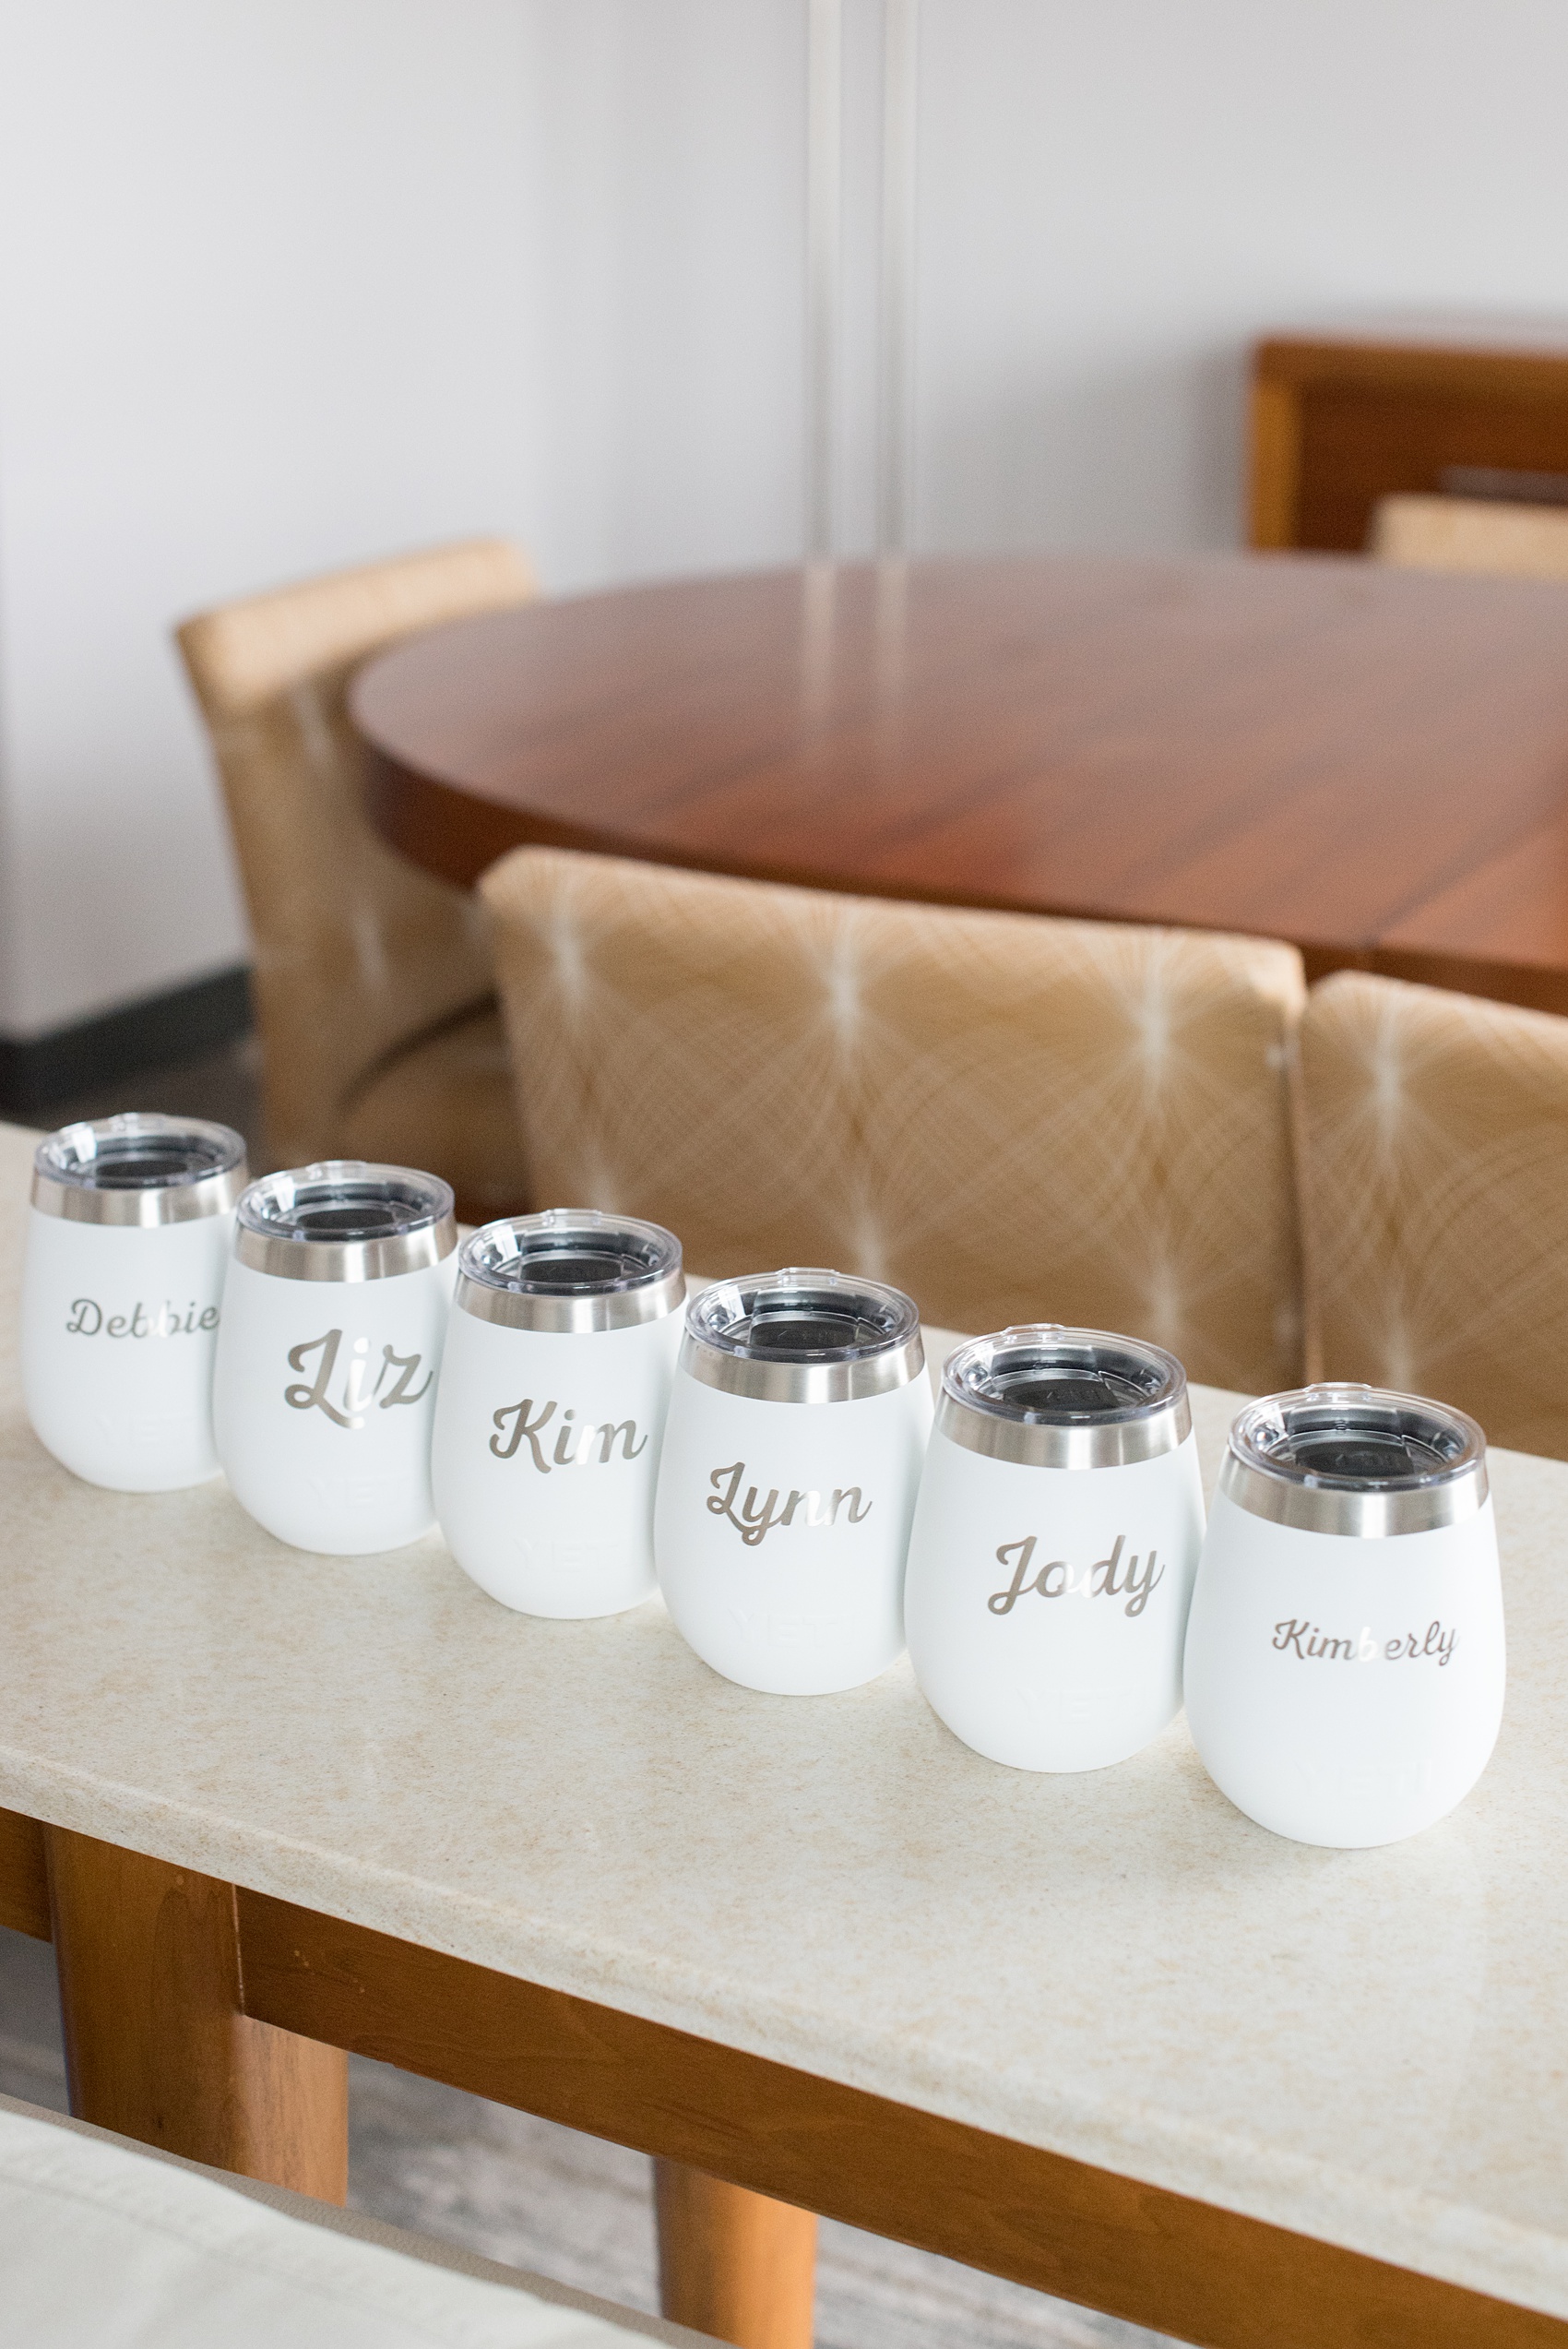 Photos of a NYC wedding venue, Tribeca Rooftop, by Mikkel Paige Photography. This ceremony and reception location has an outdoor space overlooking the Manhattan skyline. These pictures will provide inspiration in New York! The bride gave her bridesmaids white Yeti cups with their names on them. Click through for more details from this celebration! #TribecaRooftop #MikkelPaige #NYCwedding #NYCWeddingVenues #NYCWeddingPhotography #Yetis #BridesmaidsGifts